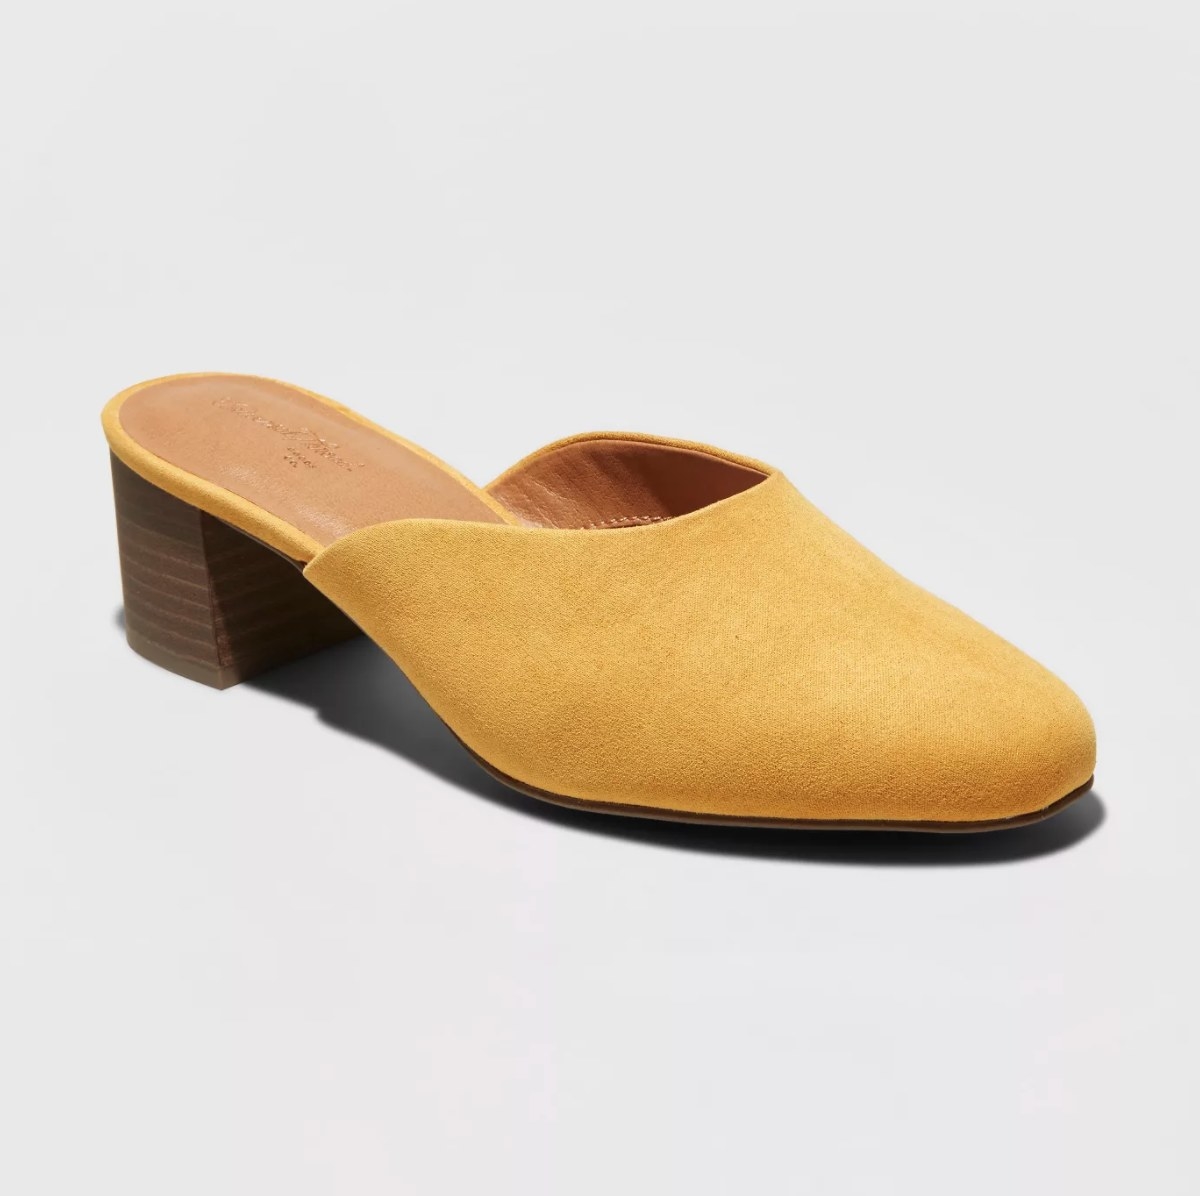 the microsuede yellow mules